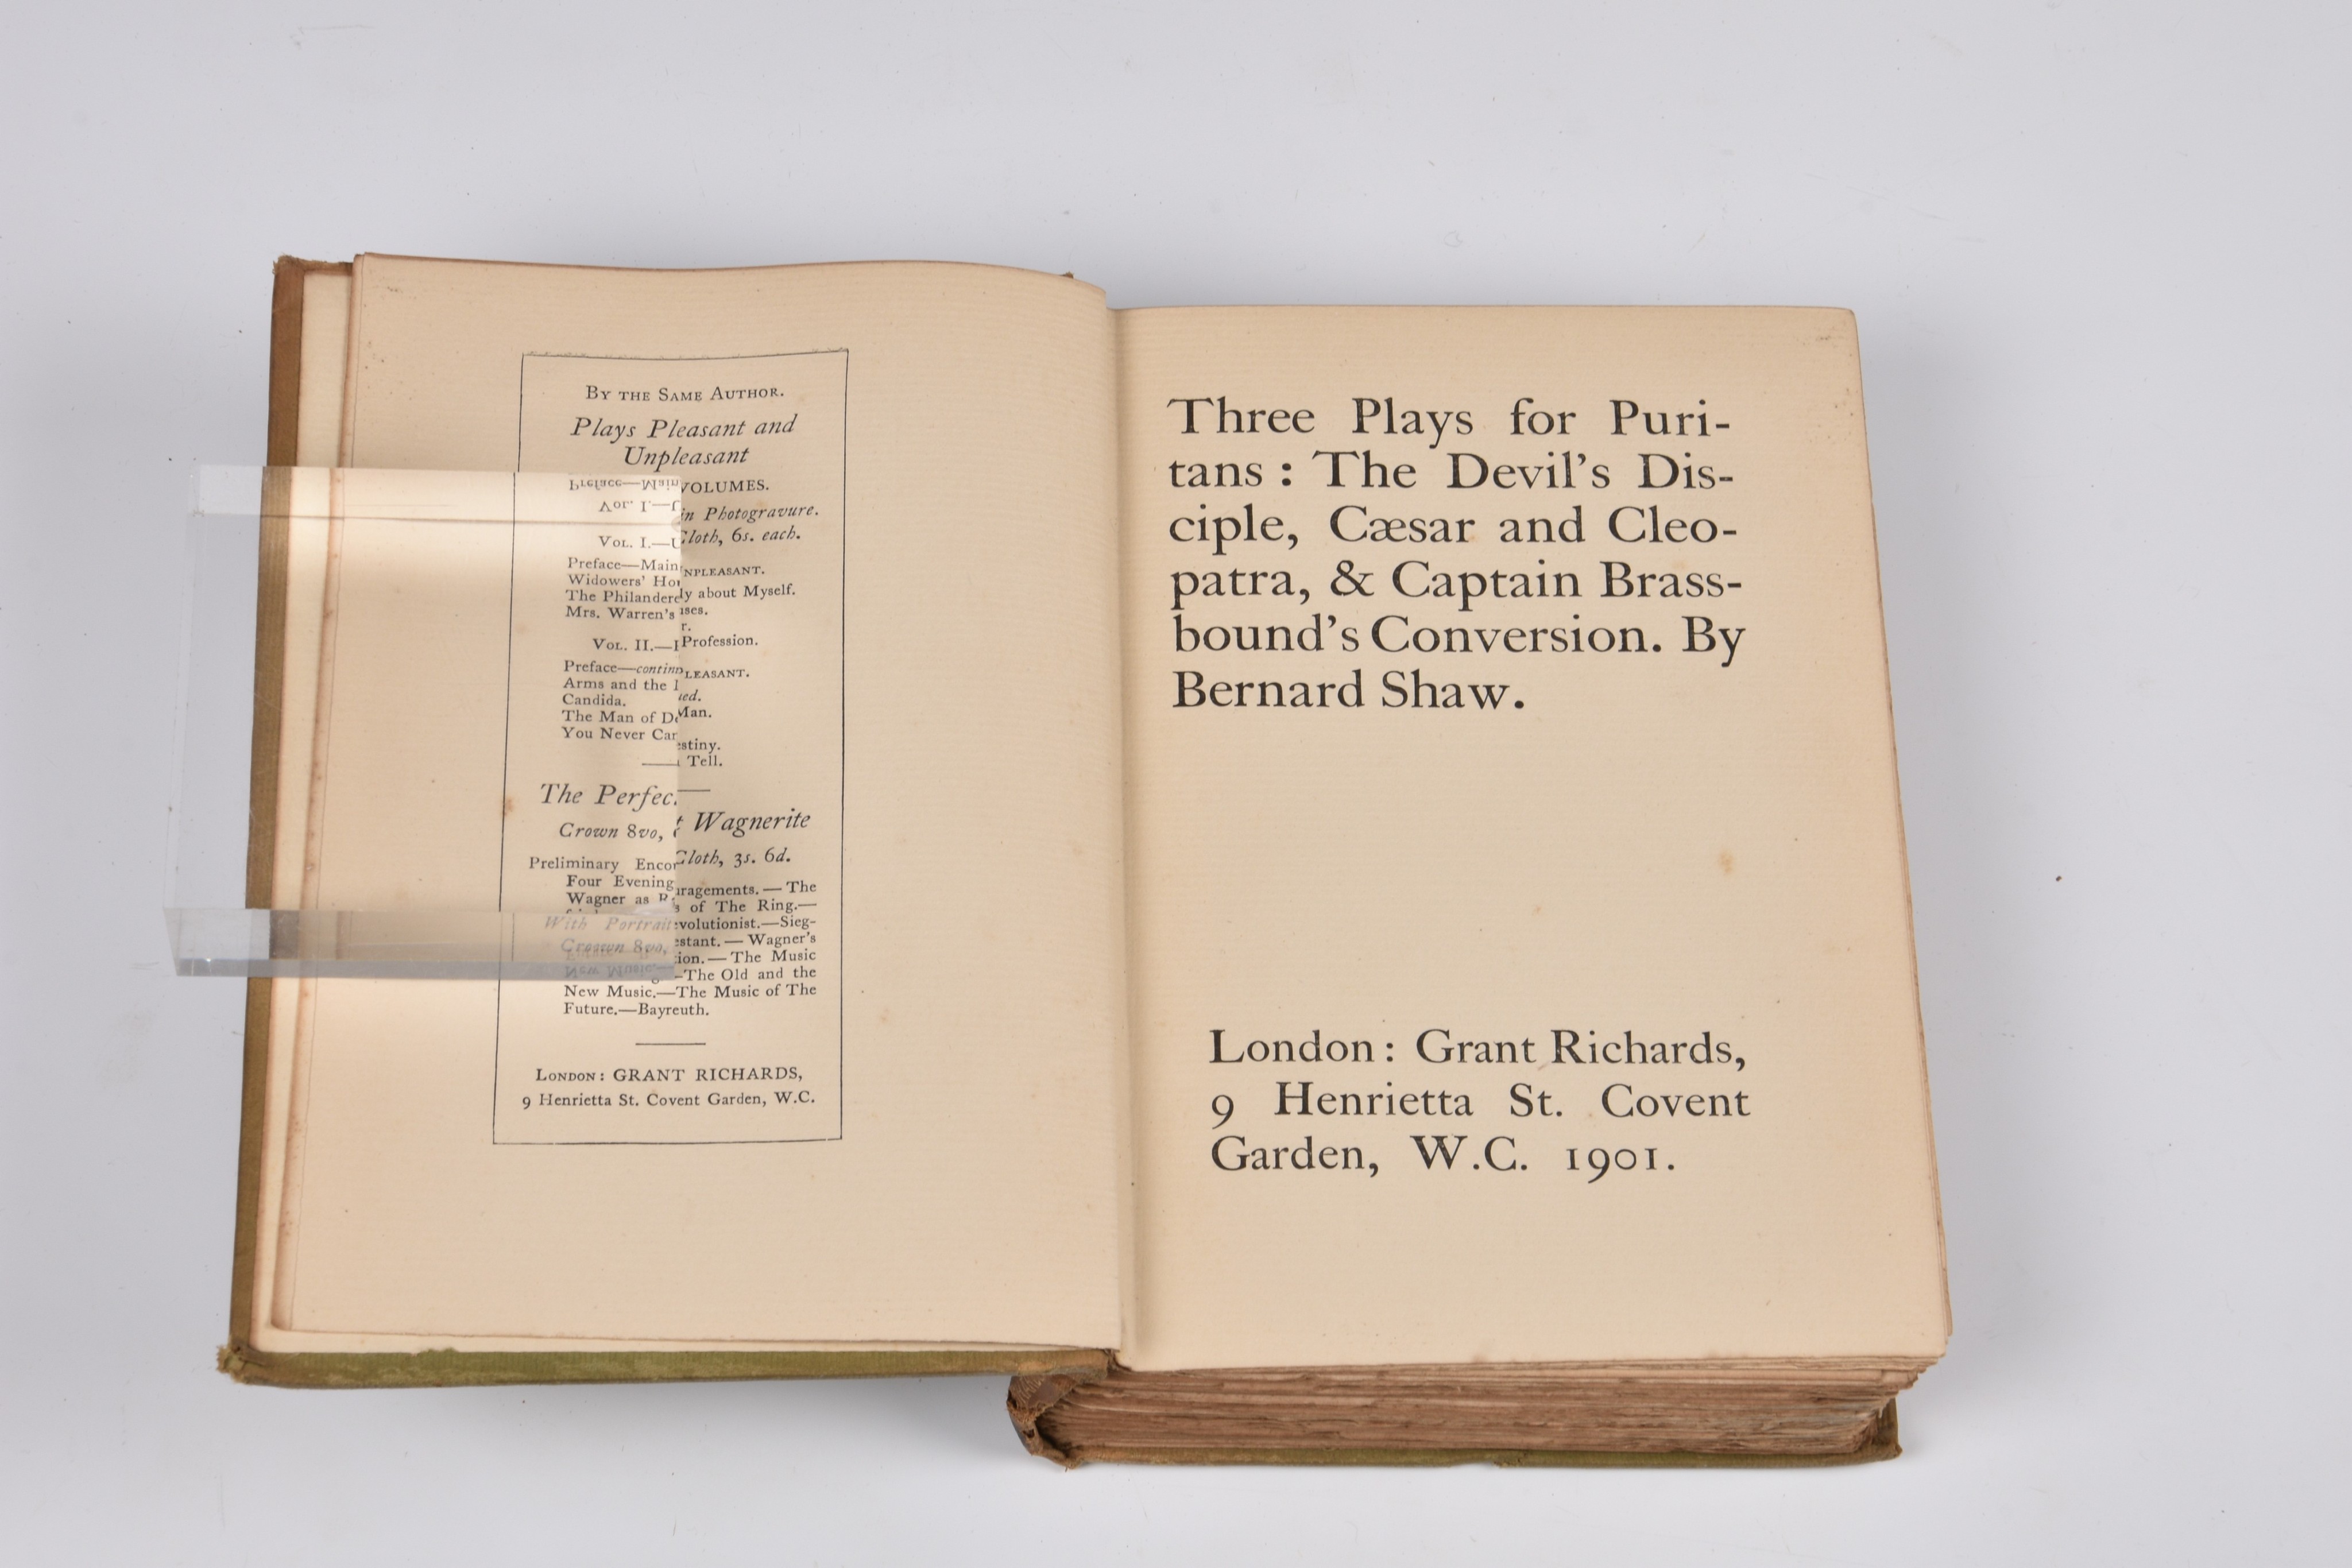 Shaw (George Bernard), Three Plays for Puritans, first edition, London, Grant Richards 1901, - Image 5 of 6